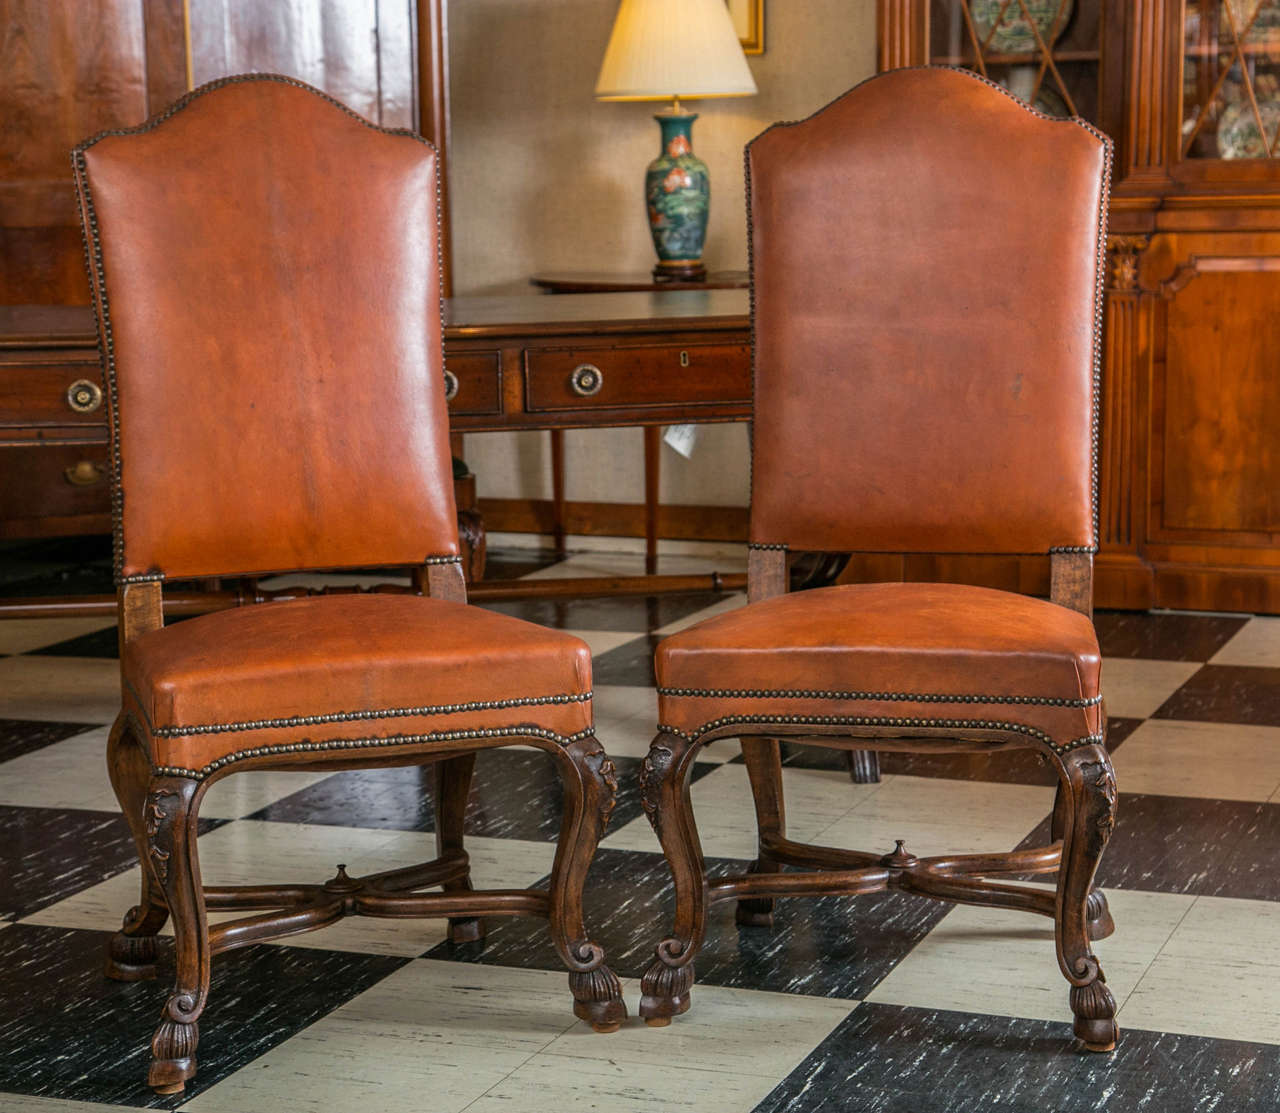 Cinghiale leather with nailhead trim give these chairs great character, however, the carving of the frames is what is remarkable about these copies of 18th century chairs. The richly carved knees draw the eye down to the shaped, crossed stretchers